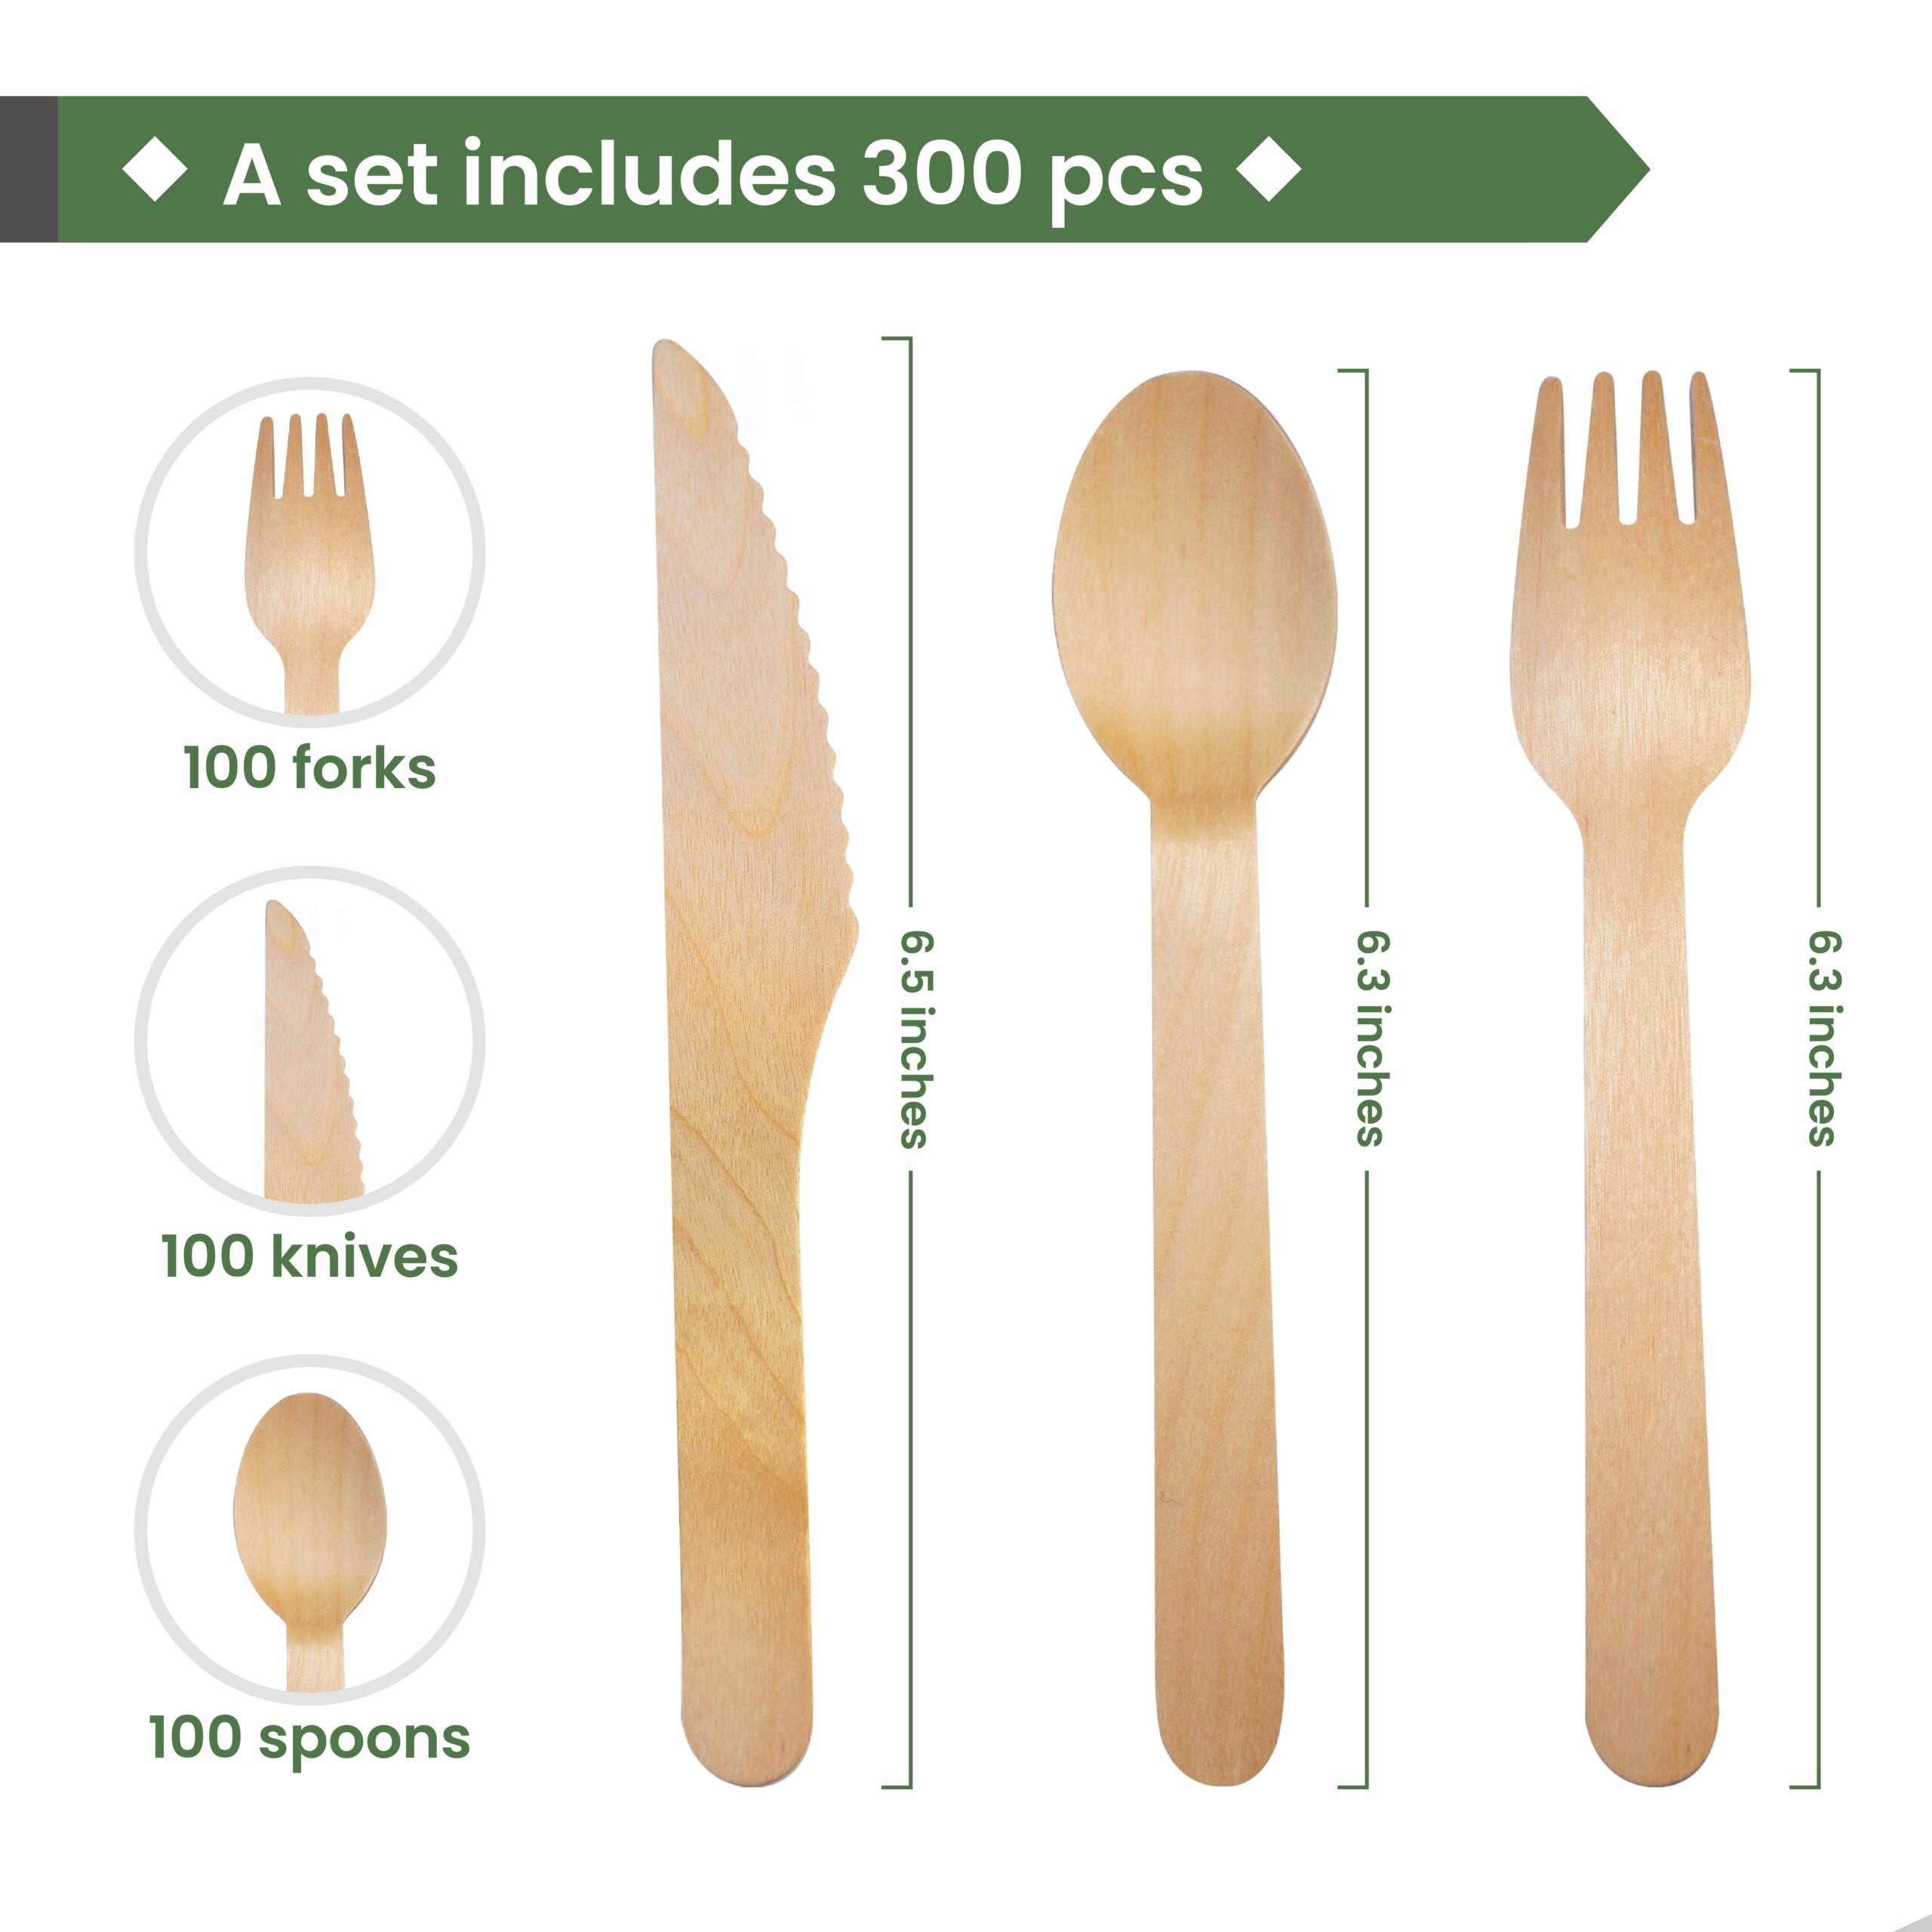 100 Knives 100 Forks Sealed 100 Spoons Birch Wood Eco Friendly Fully Compostable Hygiene Proof 300 Wooden Cutlery Set Biodegradable